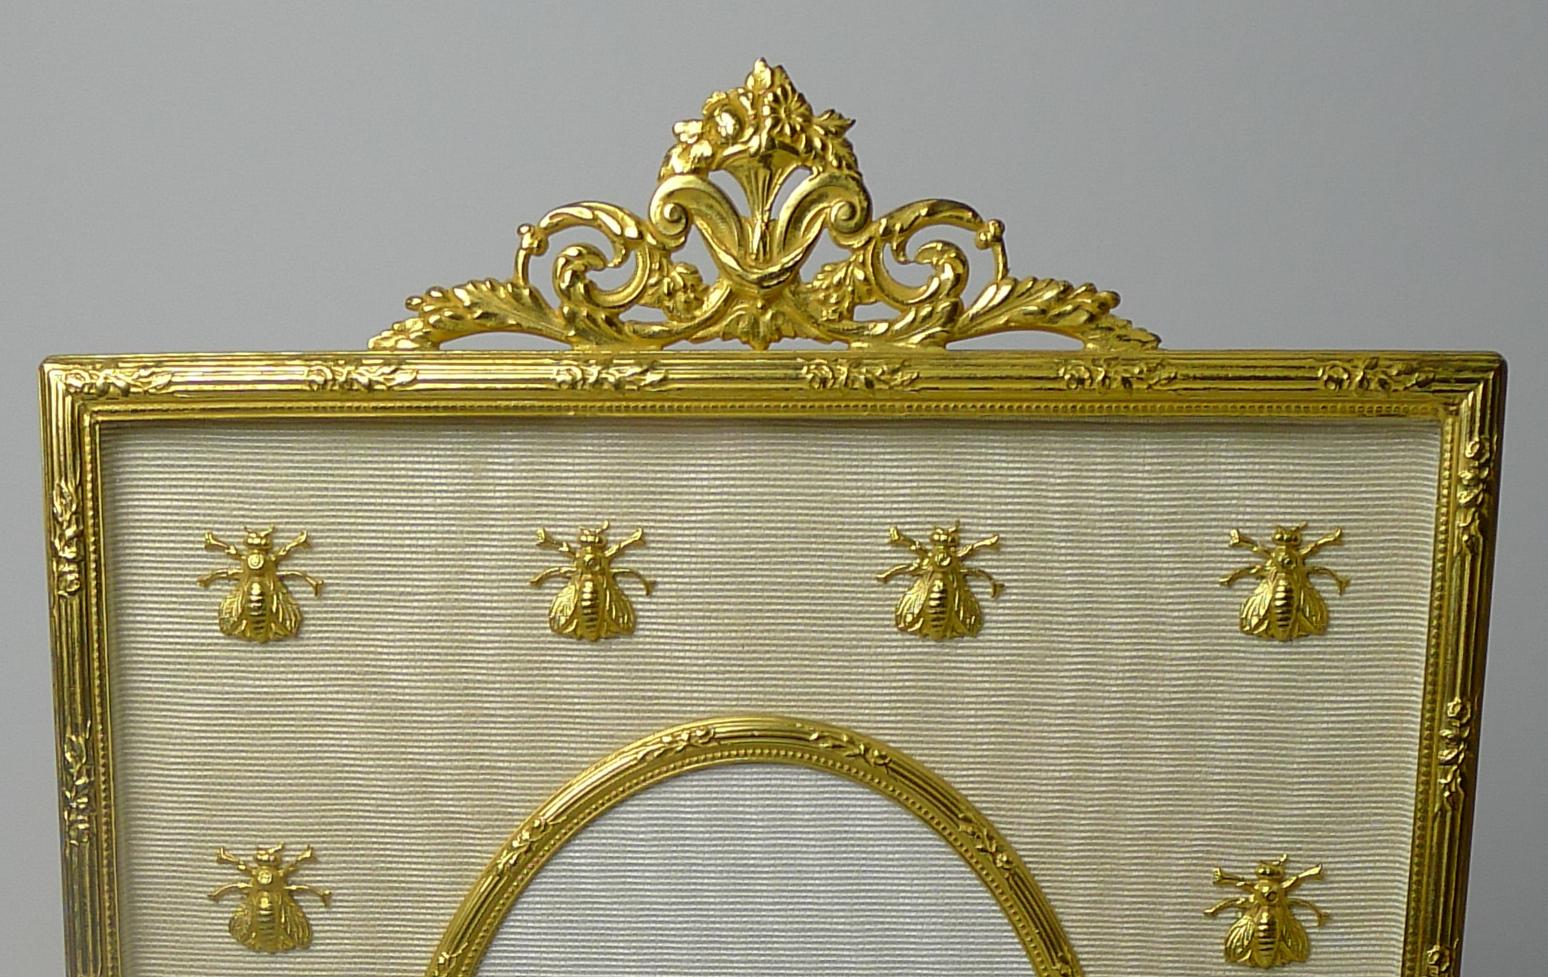 Always highly sought-after, this bronze dore photograph frame is lucky enough to be decorated with a series of gilded bronze bees mounted onto the cream coloured silk taffeta.  The central oval aperture measures 4 1/2